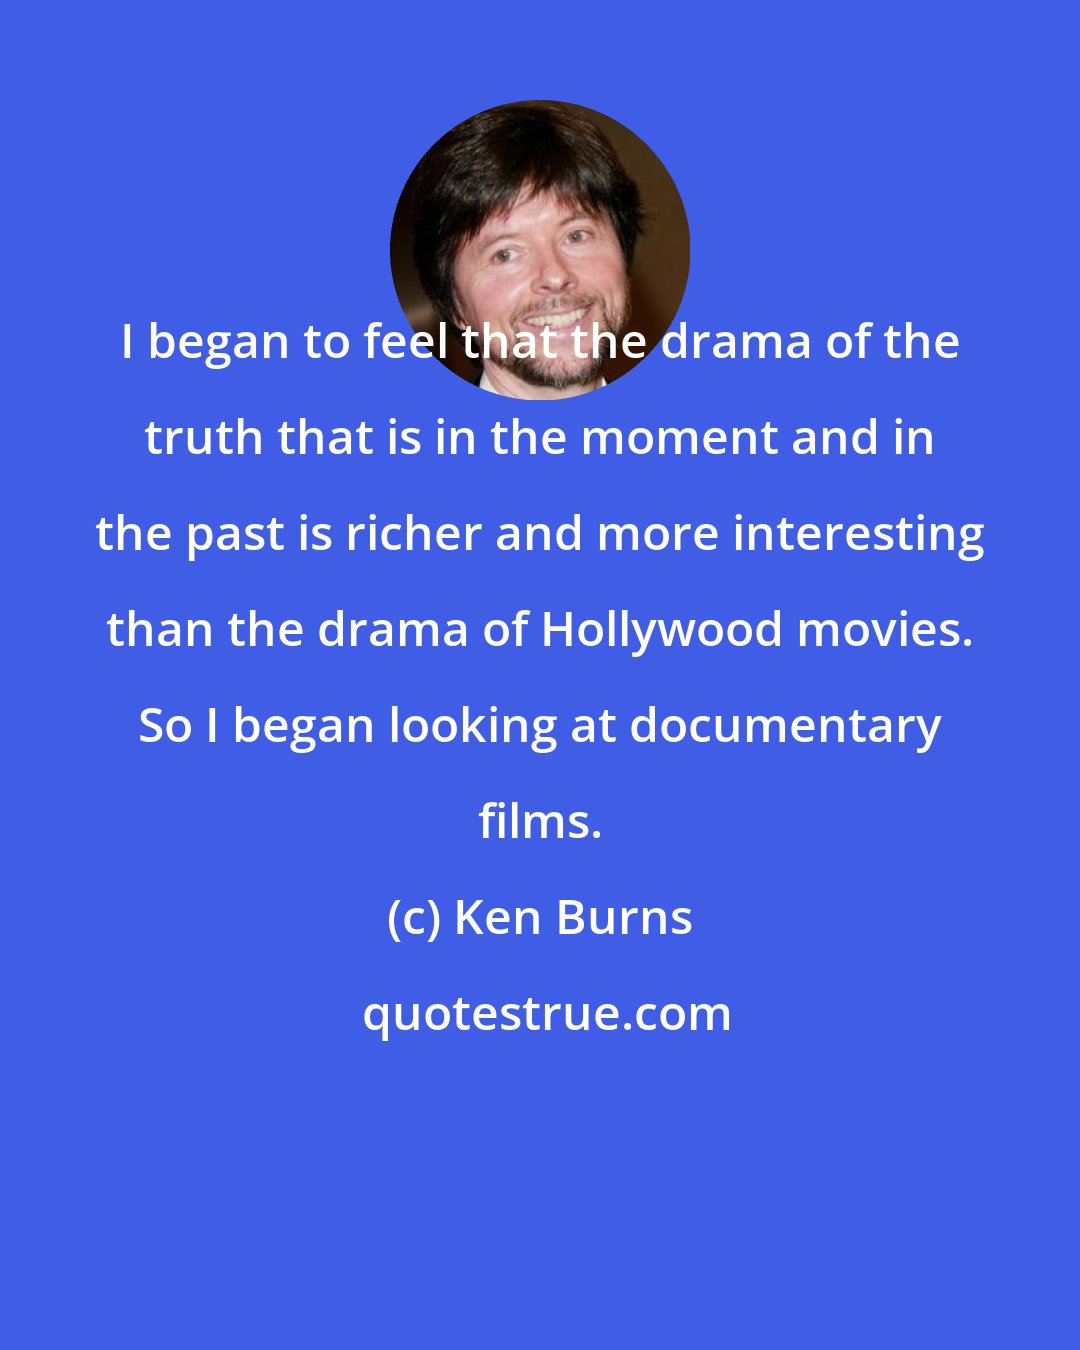 Ken Burns: I began to feel that the drama of the truth that is in the moment and in the past is richer and more interesting than the drama of Hollywood movies. So I began looking at documentary films.